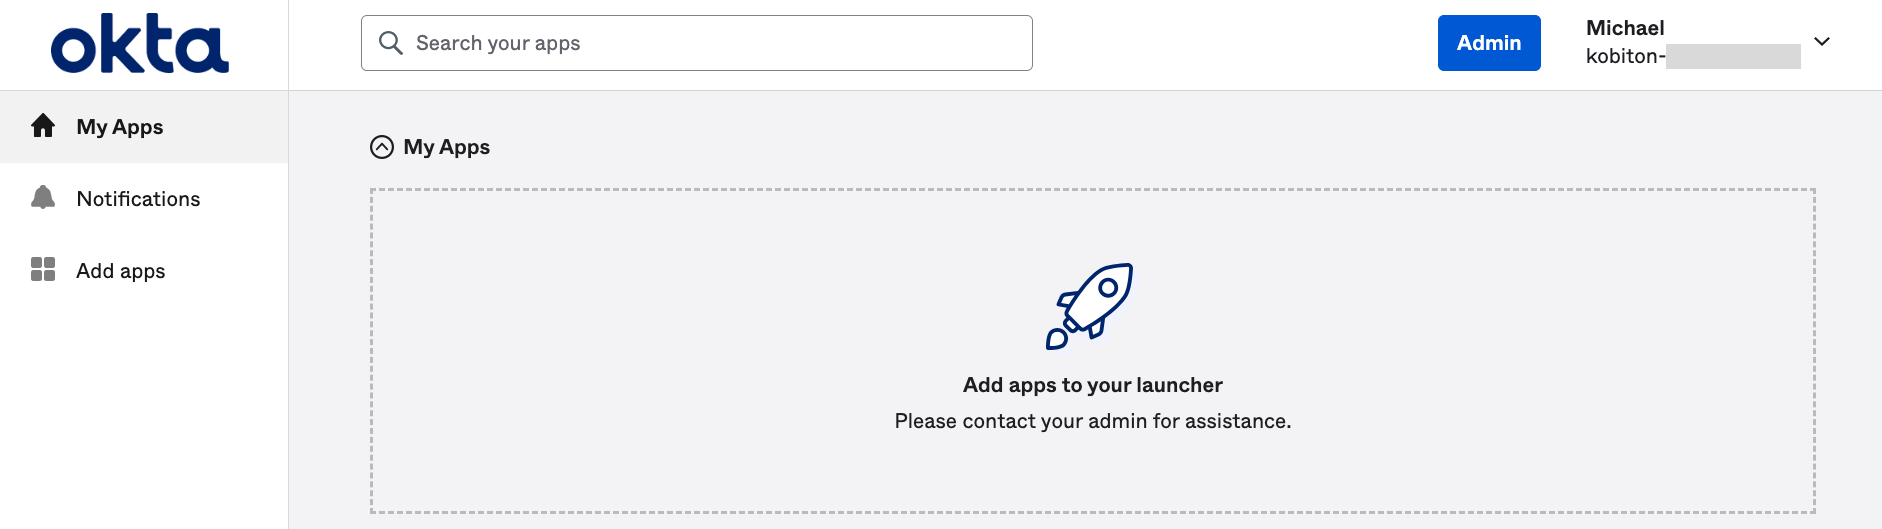 The Admin button in Okta home page